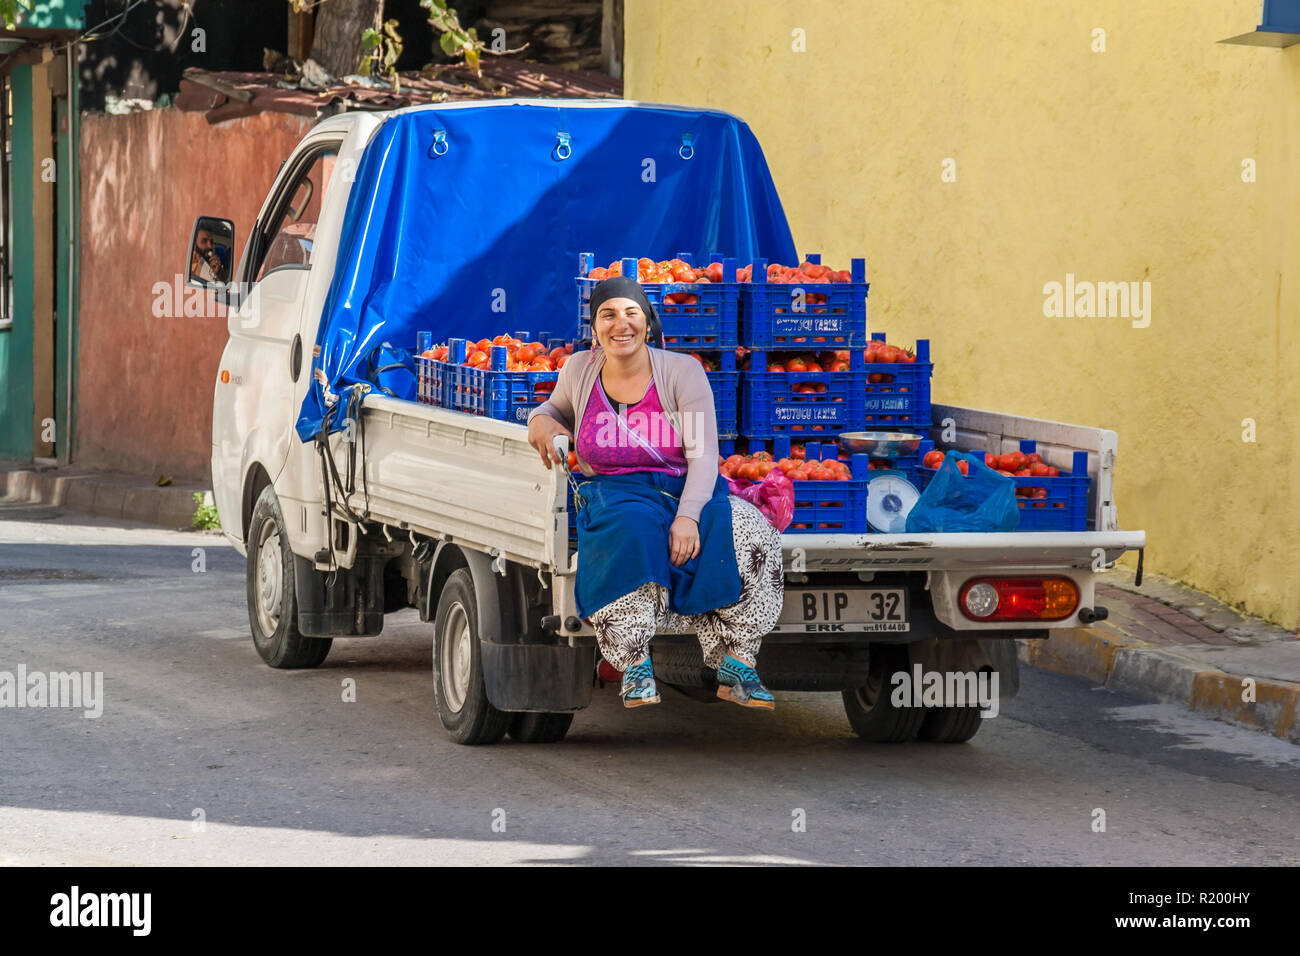 Istanbul, Turkey, November 13, 2012: Turkish woman riding on the back of a truck carrying crates of tomatoes. Stock Photo